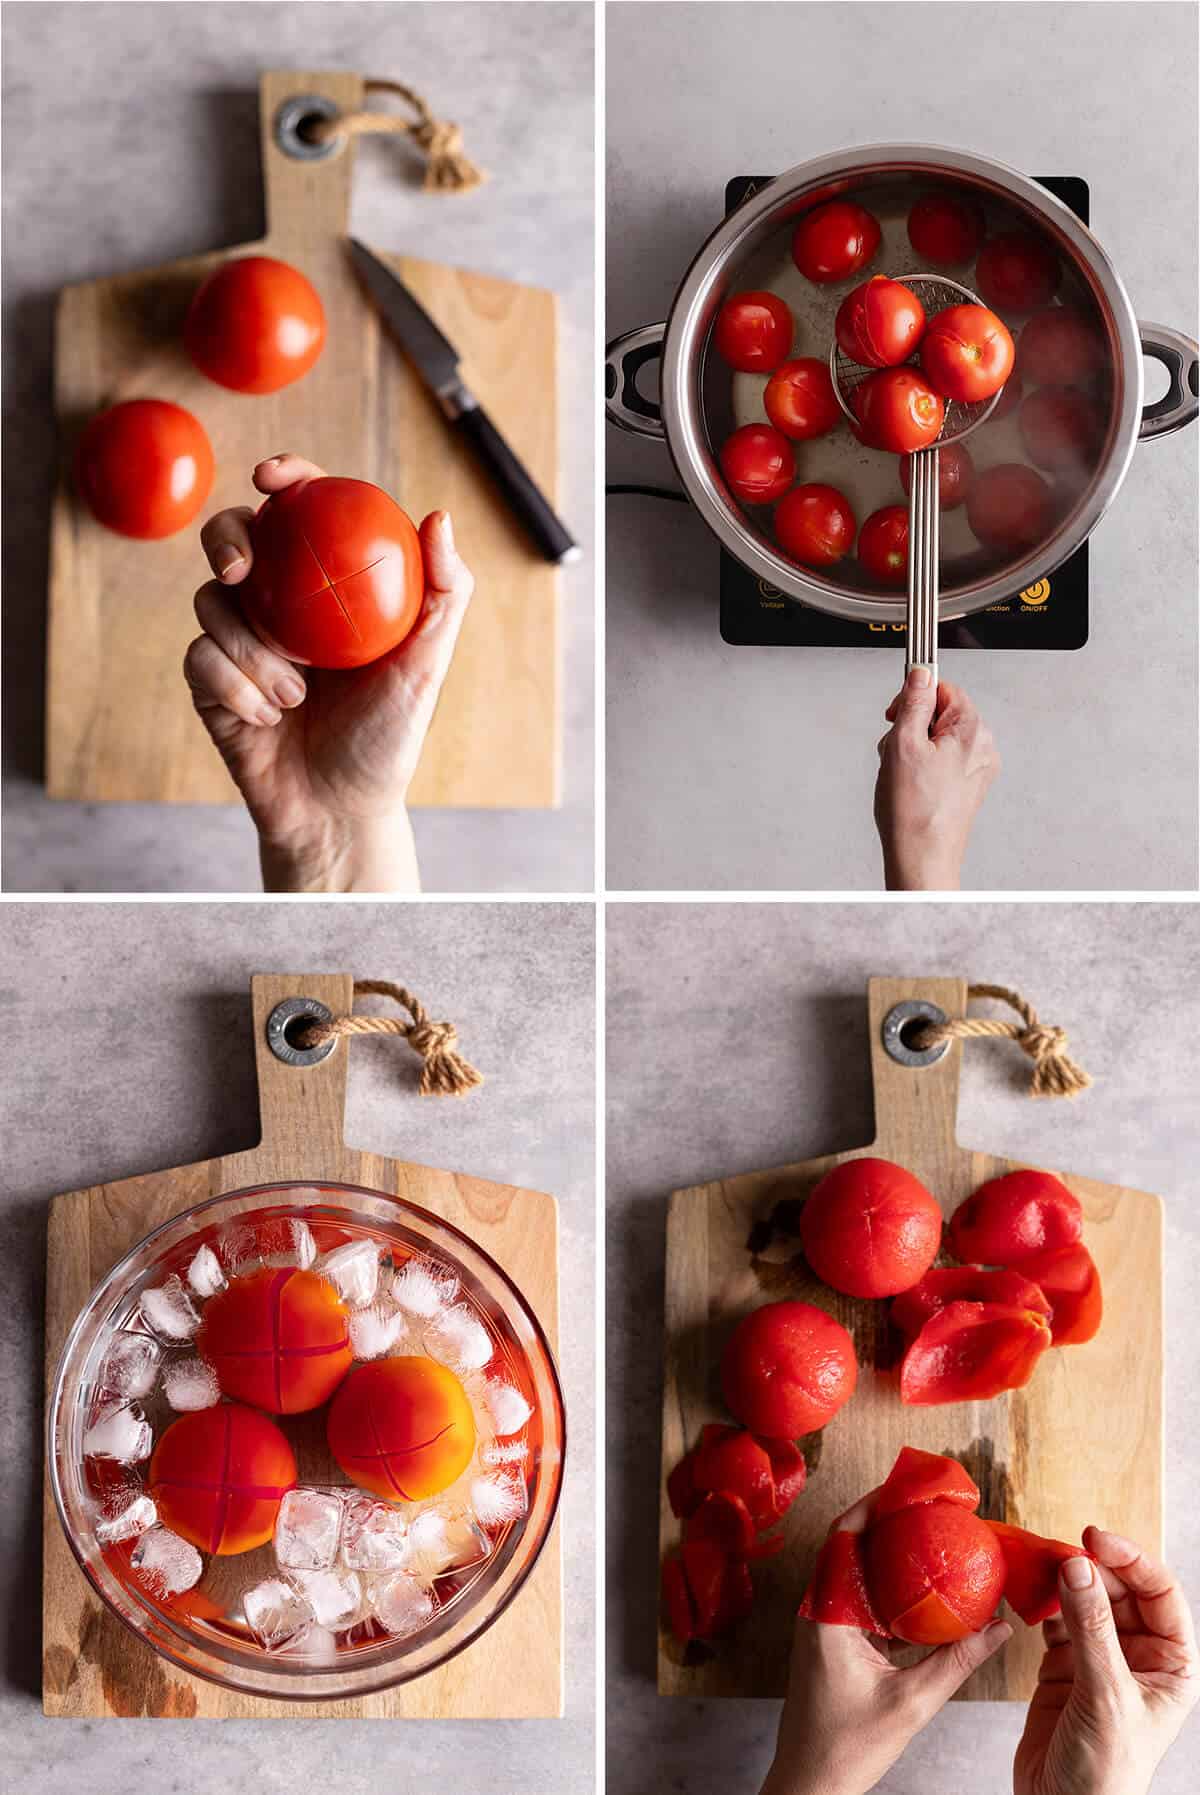 steps showing how to peel tomatoes by blanching